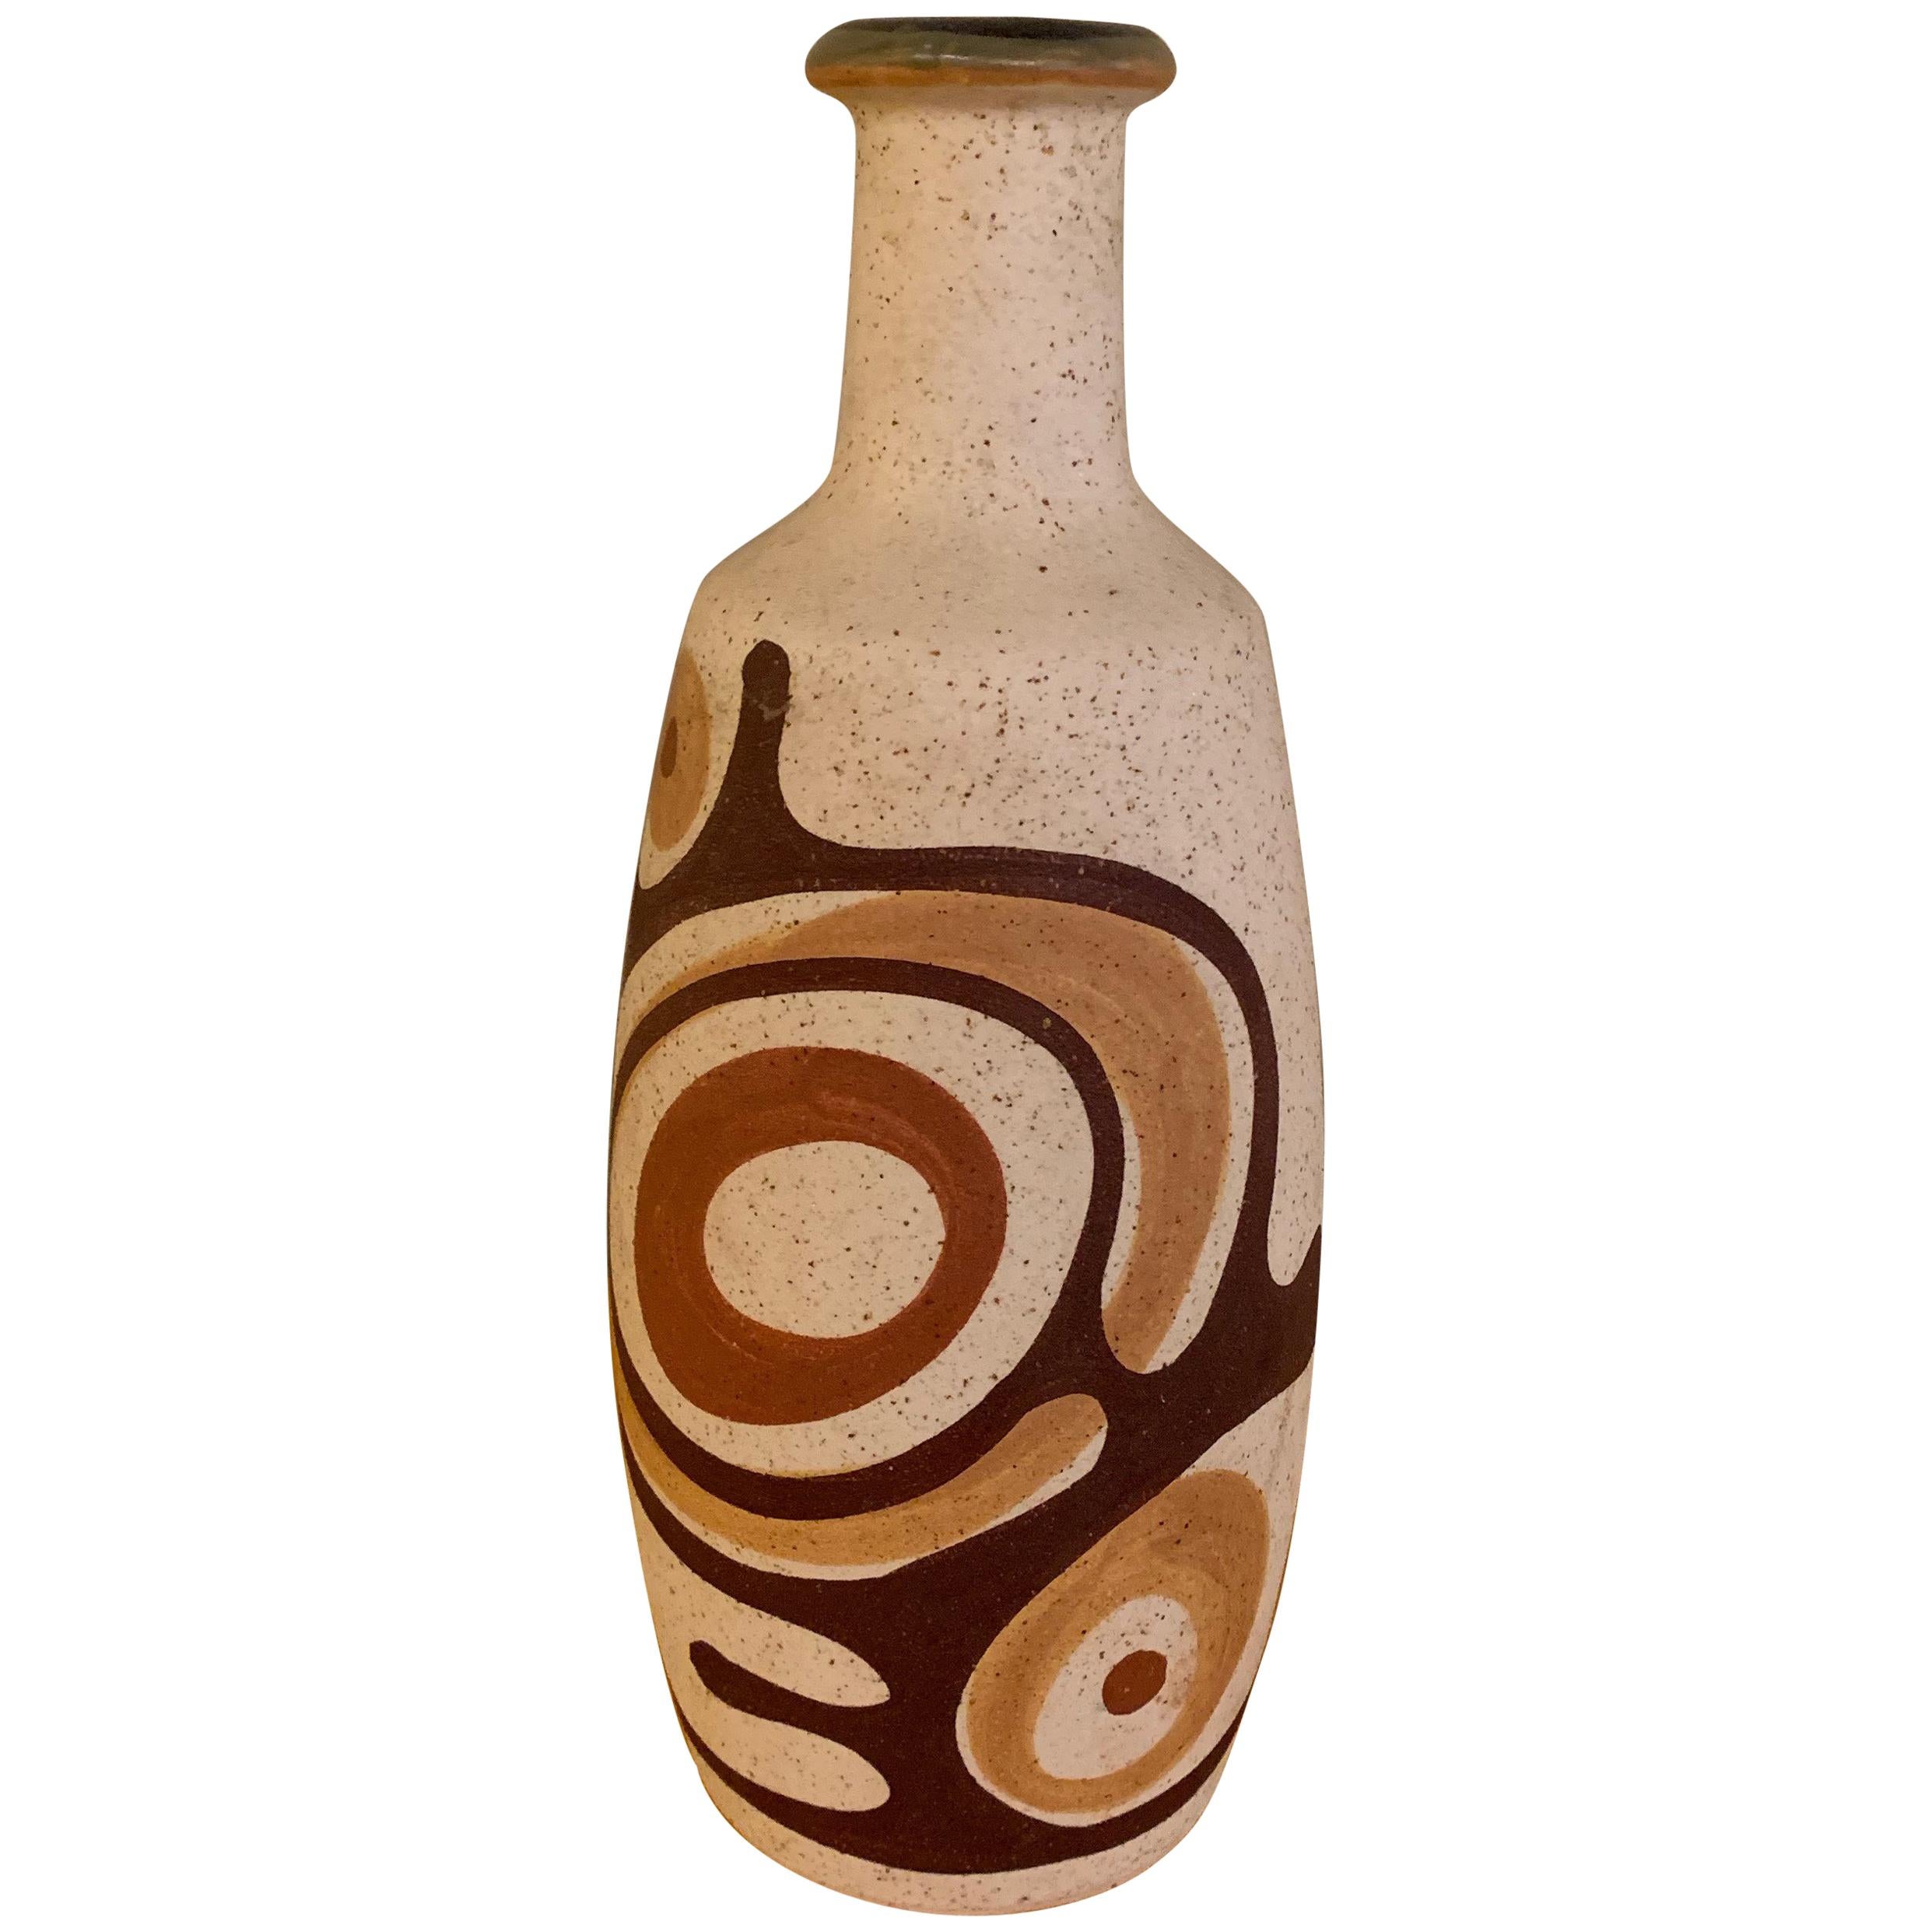 Tall Art Pottery Vase by Lapid, Israel